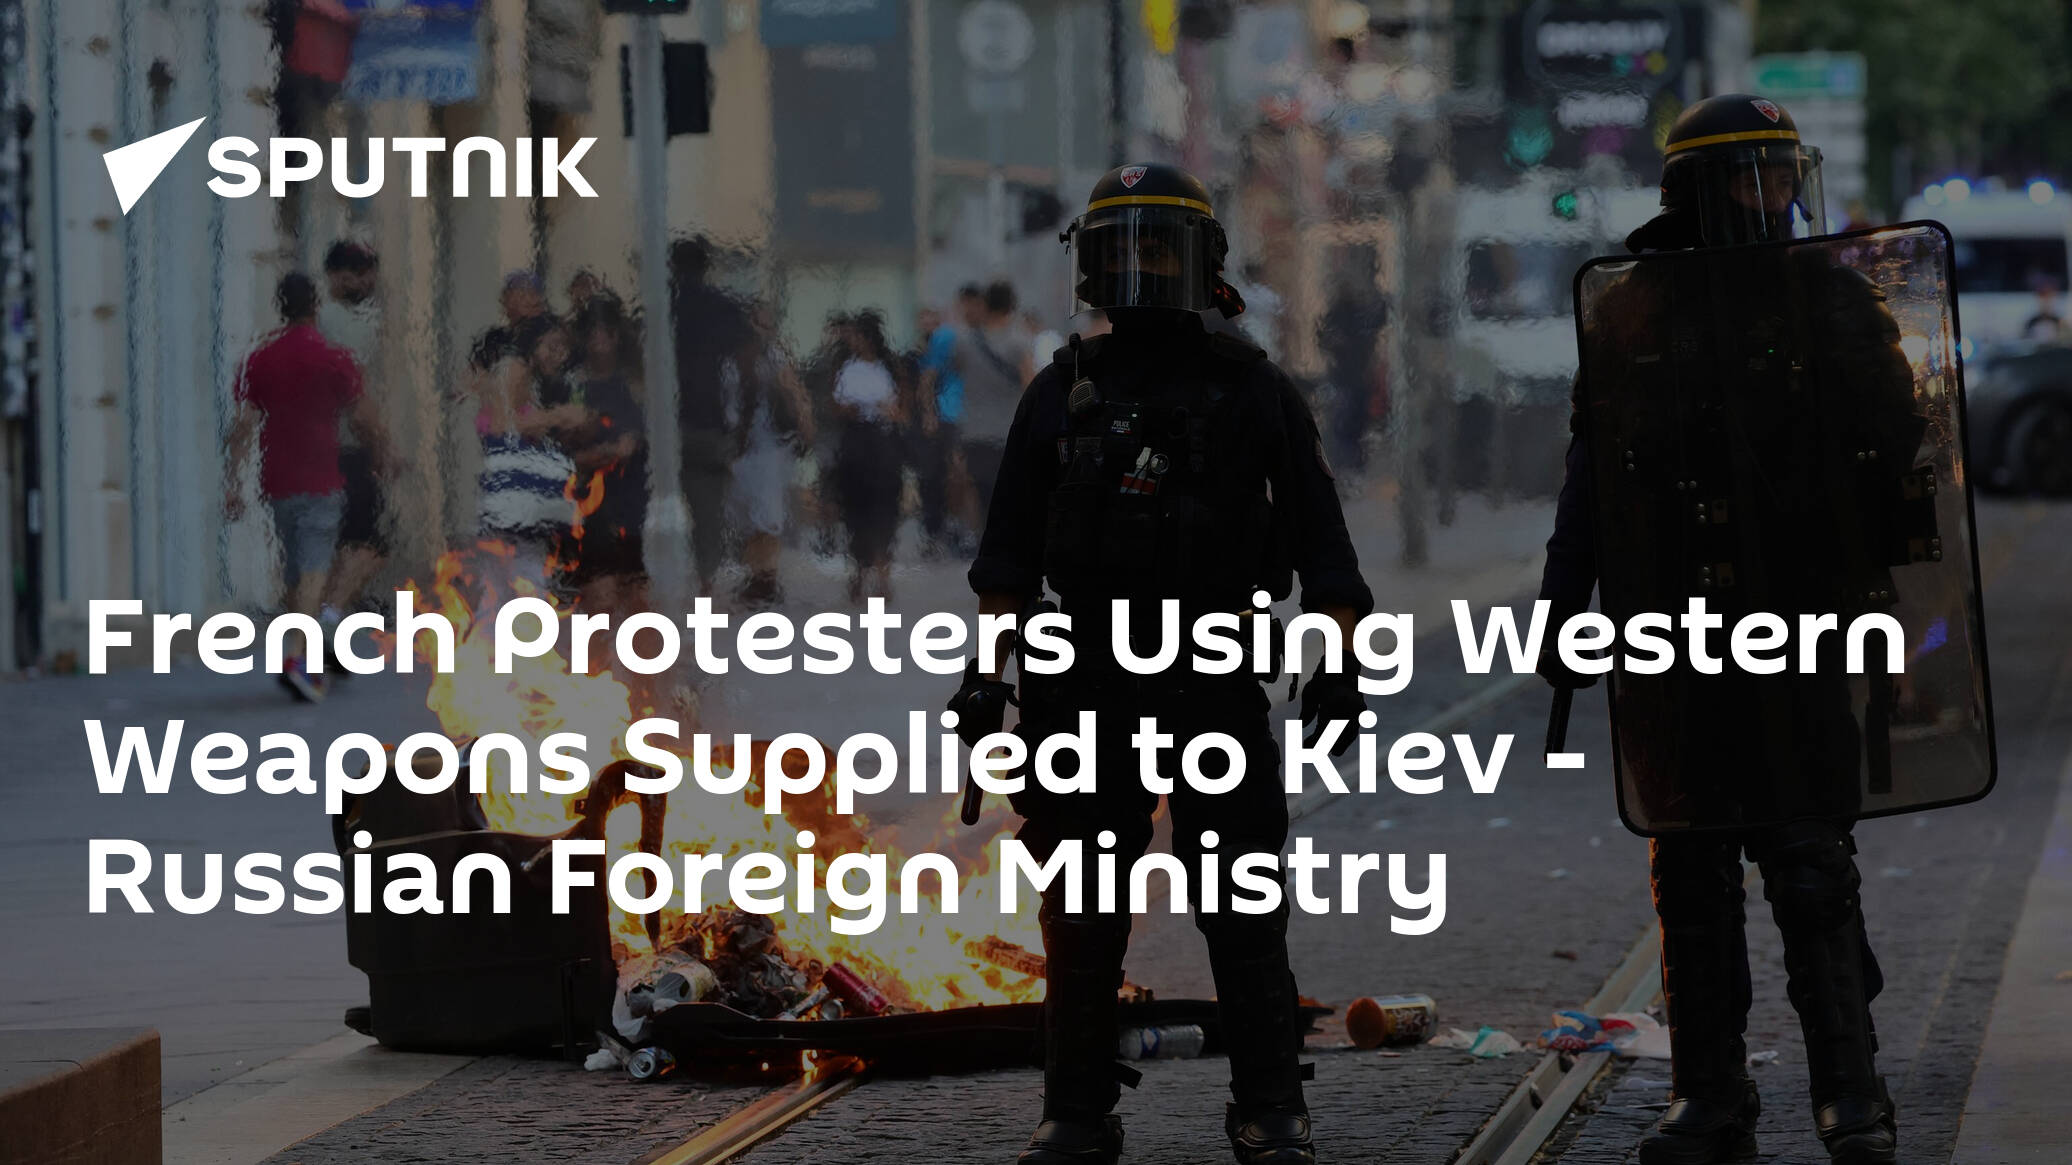 Western Weapons Supplied to Kiev Used by Protesters in France – Russian Foreign Ministry